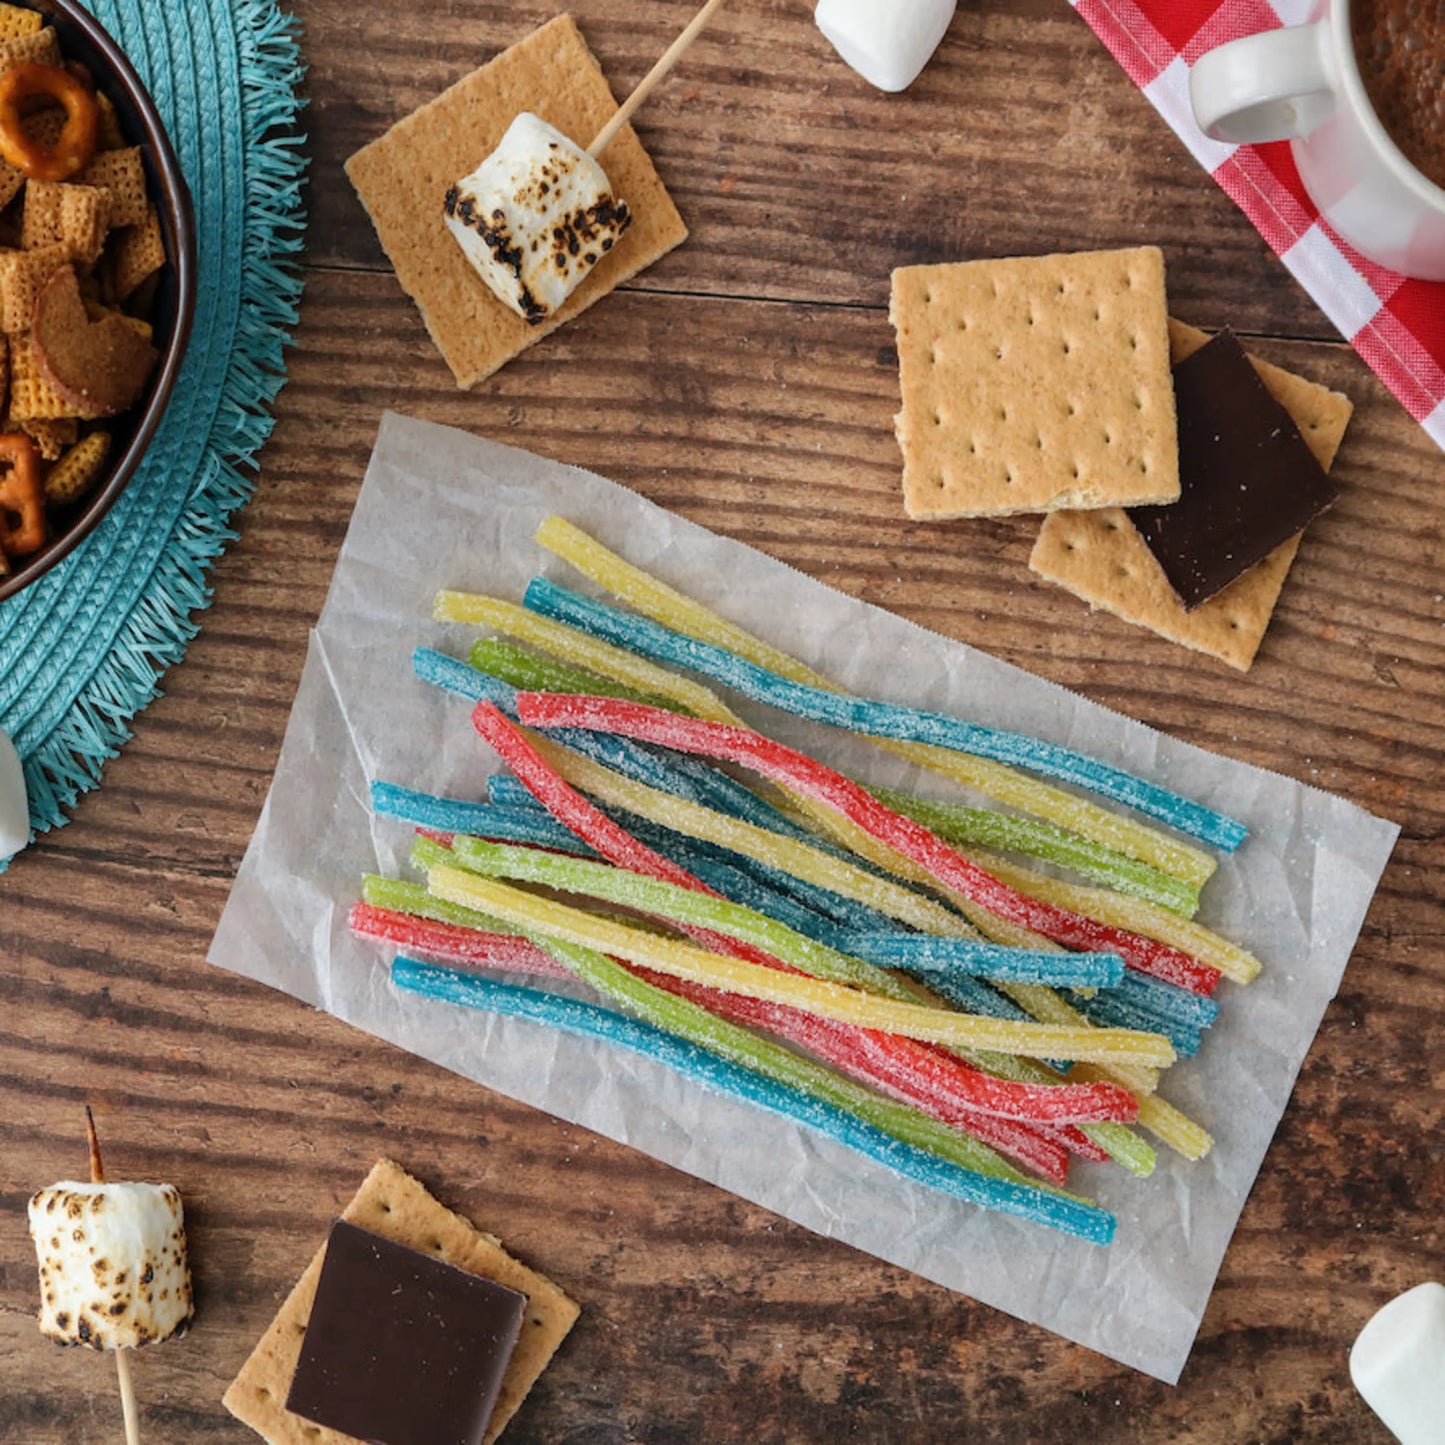 Sour Punch Rainbow Sour Candy Straws alongside s'mores supplies